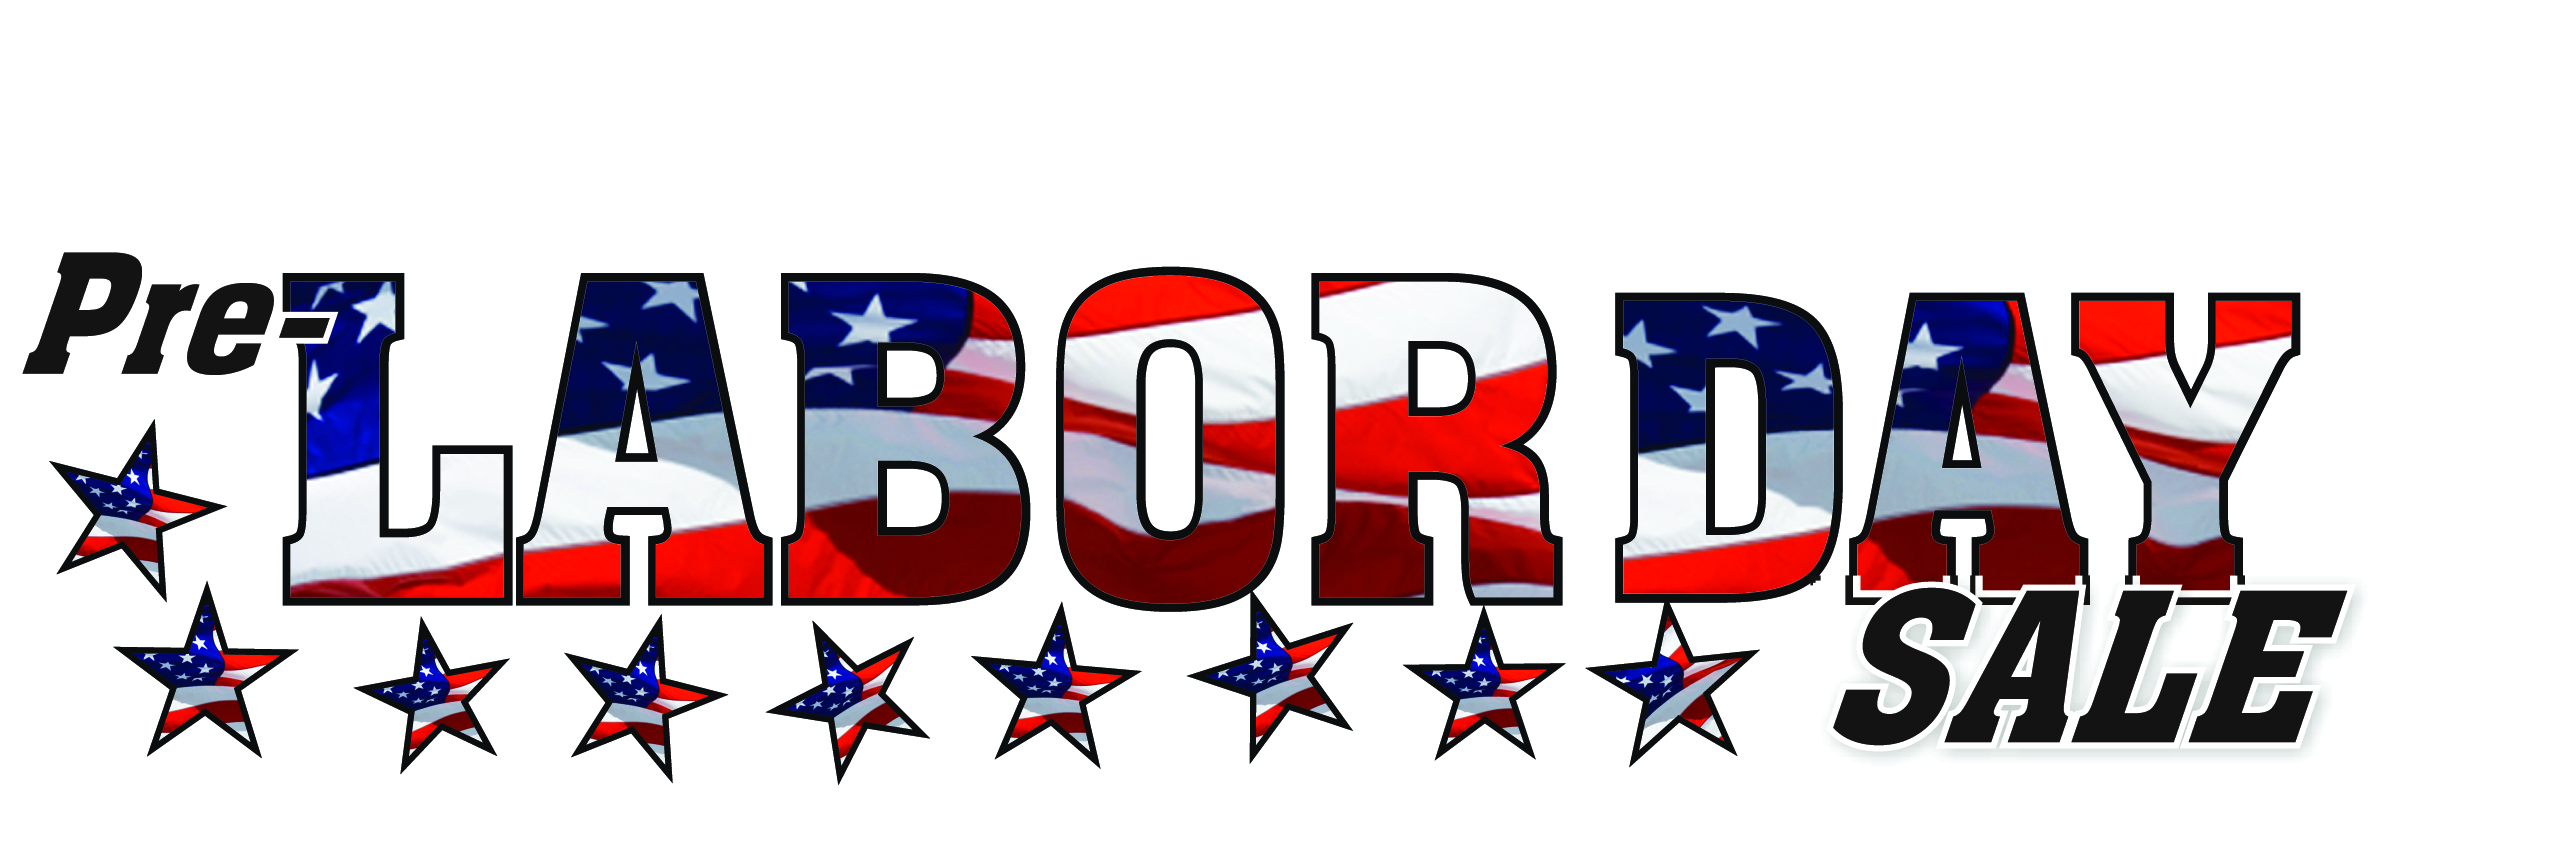 free clipart images labor day - photo #25